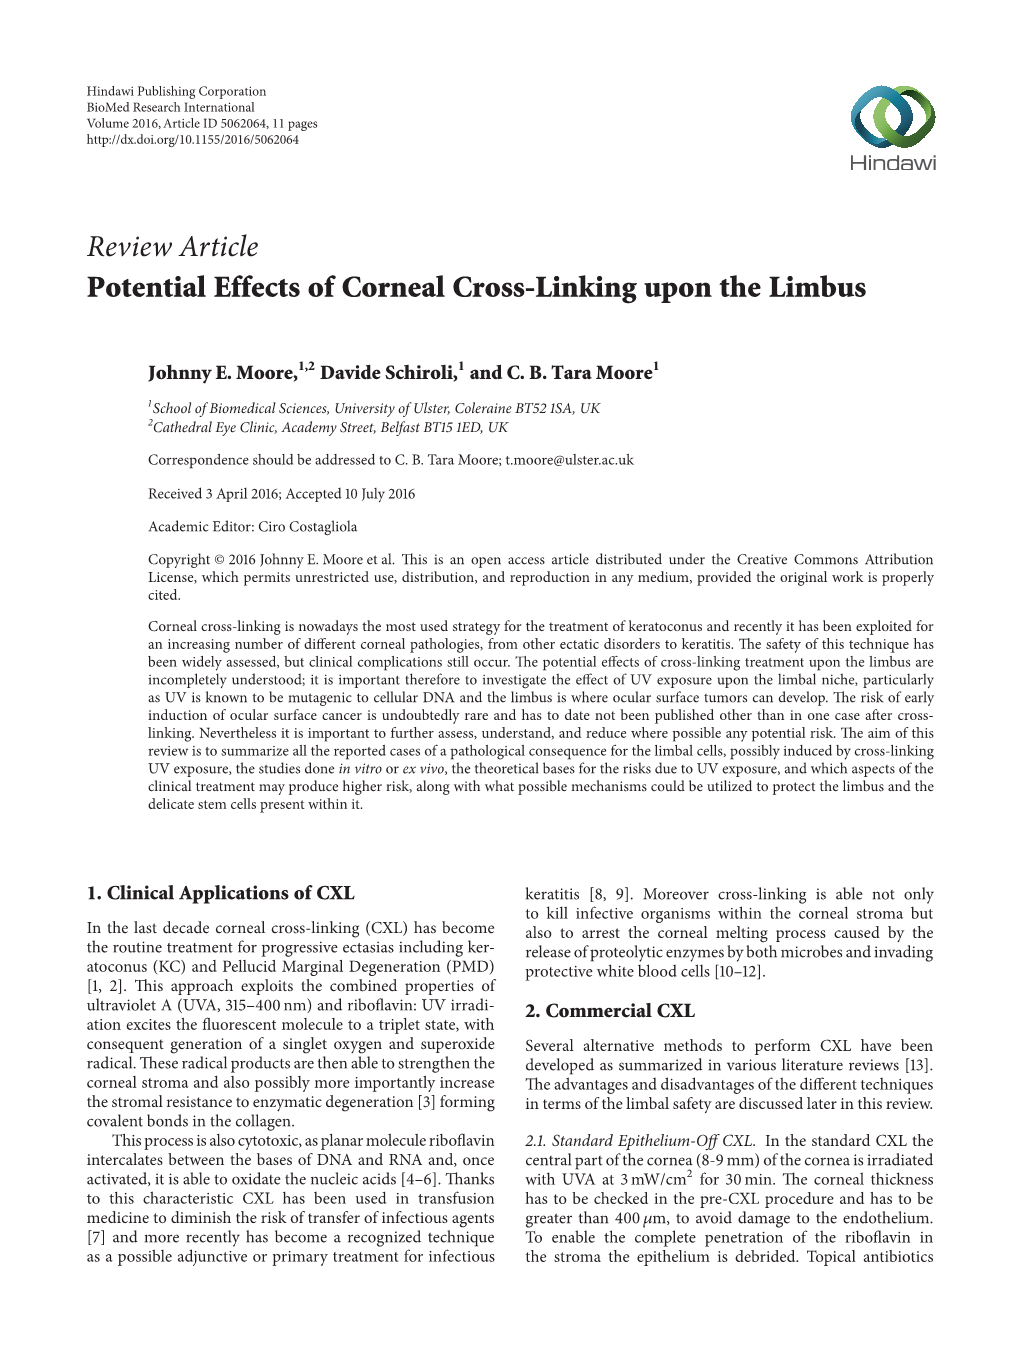 Potential Effects of Corneal Cross-Linking Upon the Limbus